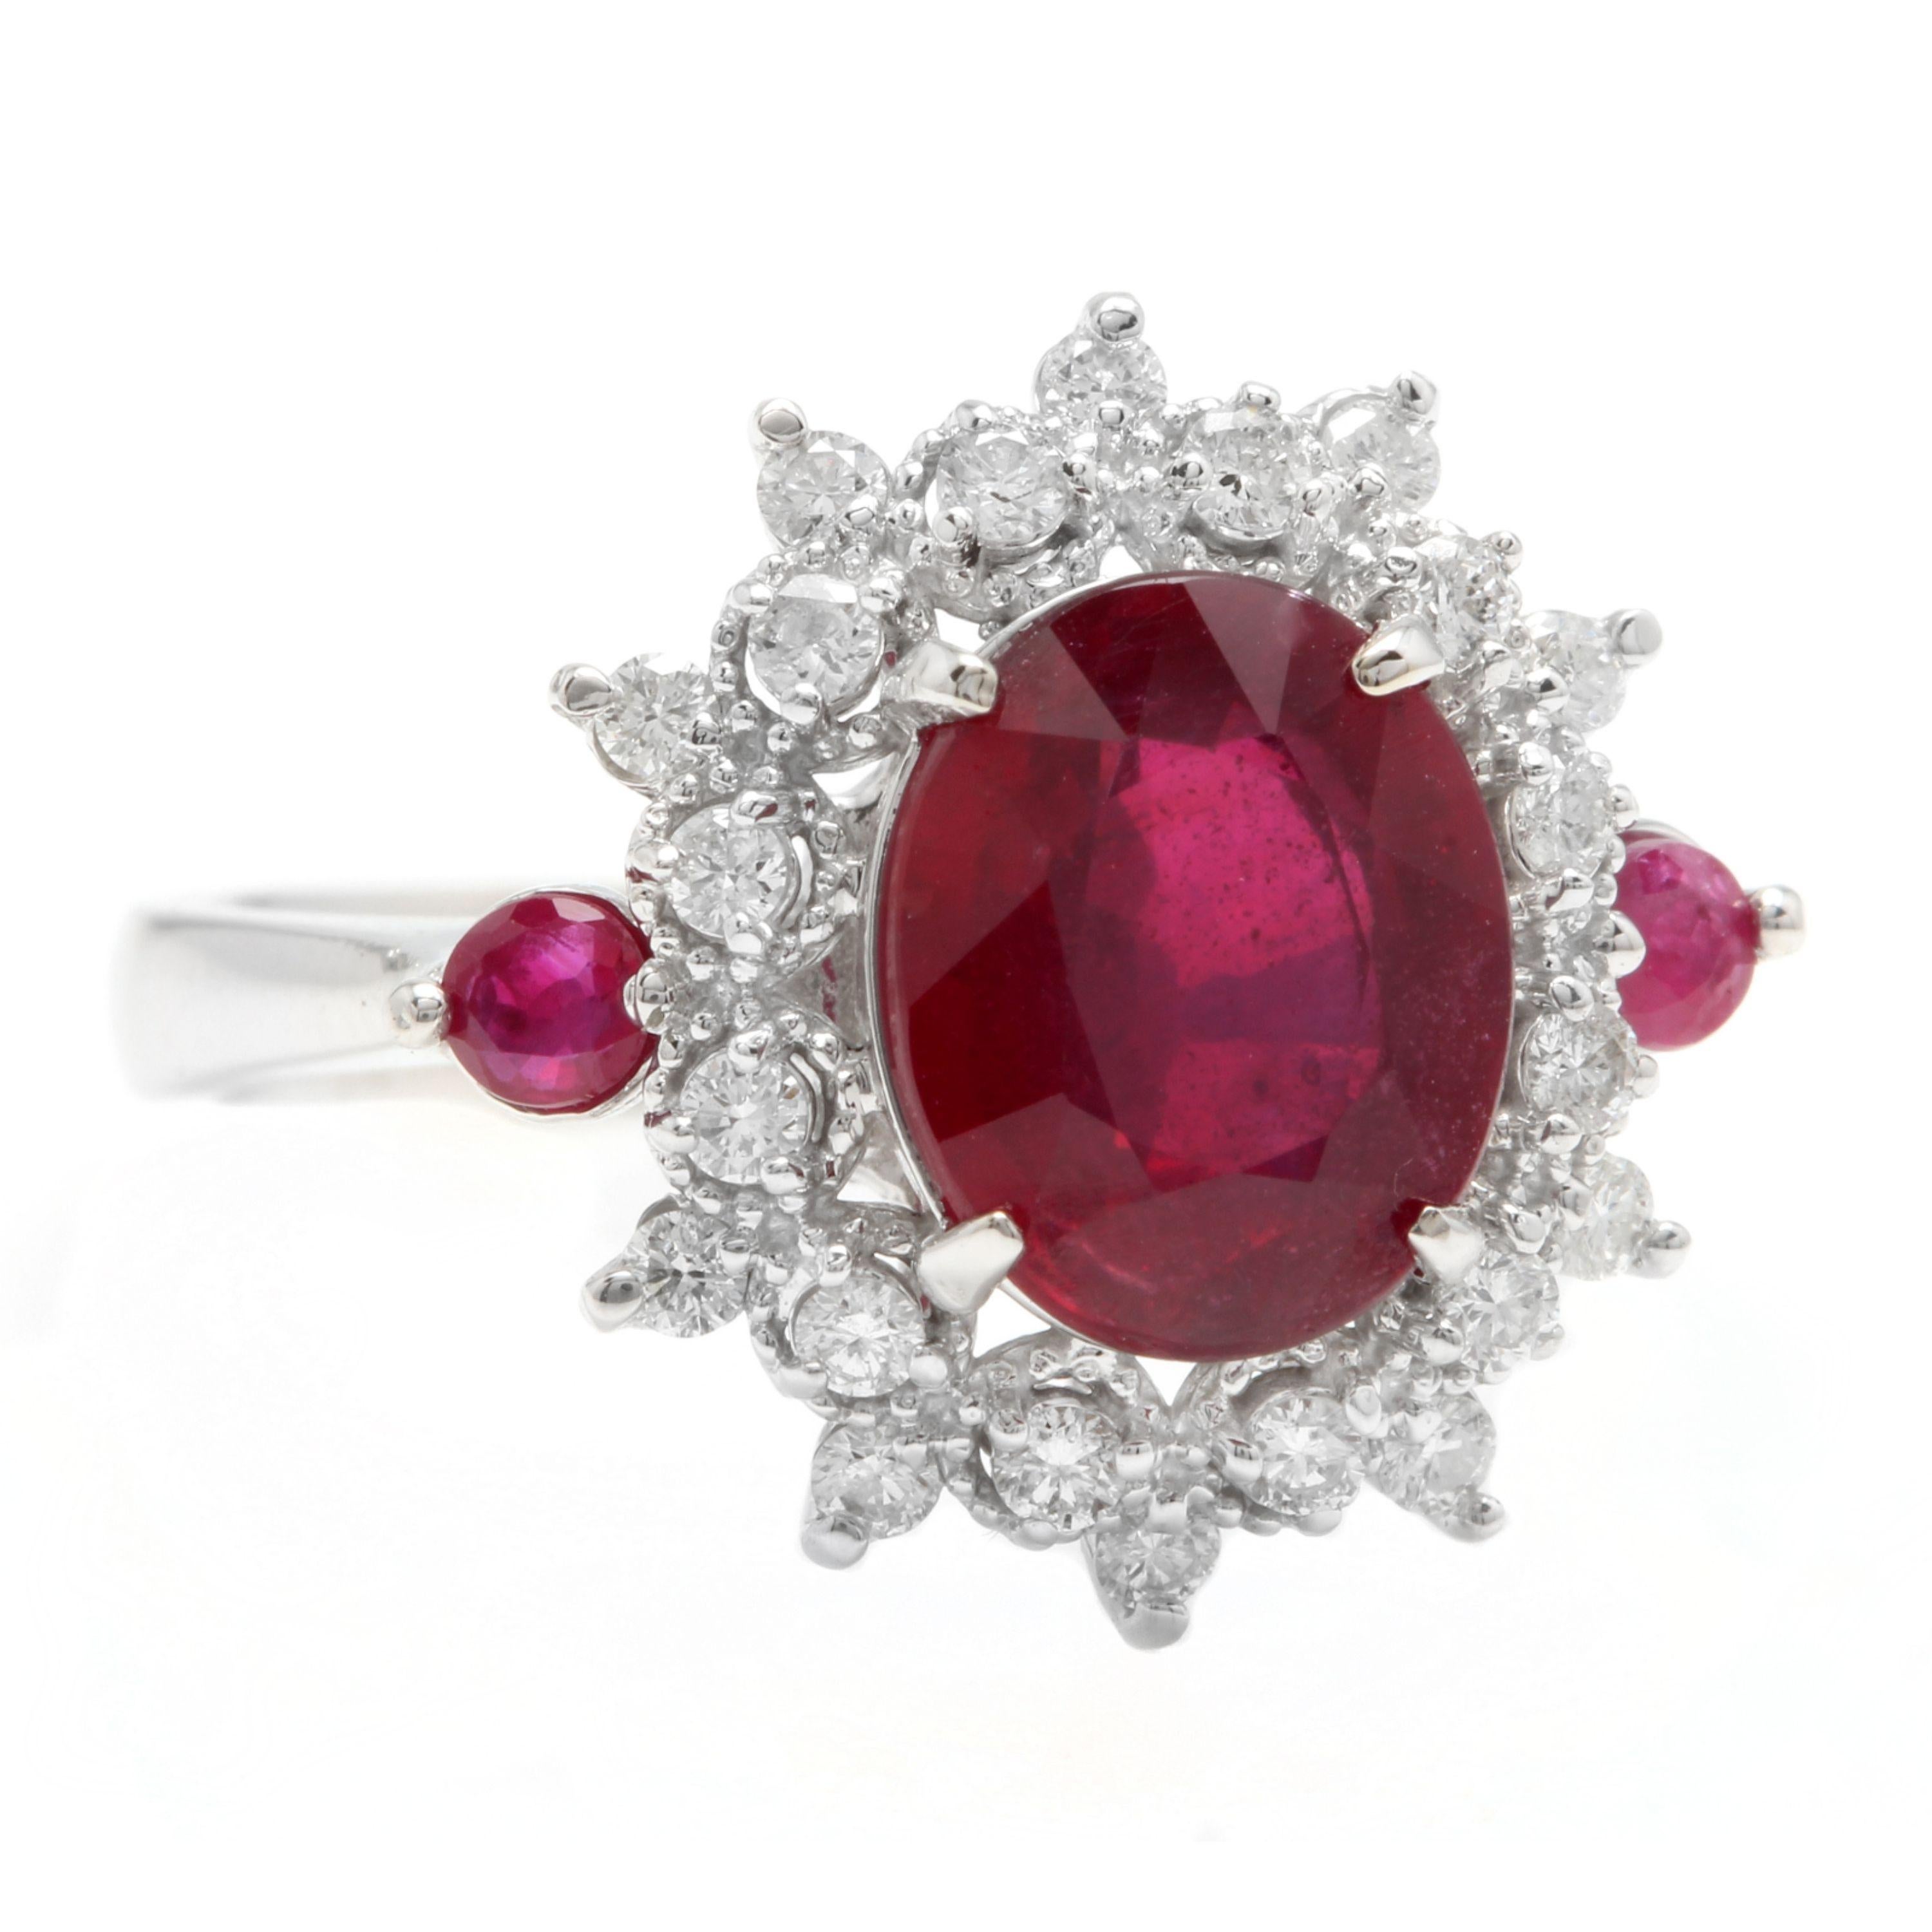 6.65 Carats Impressive Red Ruby and Diamond 14K White Gold Ring

Total Red Ruby Weight is Approx. 6.00 Carats (lead glass-filled)

Ruby Measures: 11 x 9mm

Natural Round Diamonds Weight: Approx. 0.65 Carats (color G-H / Clarity SI1-SI2)

Ring size: